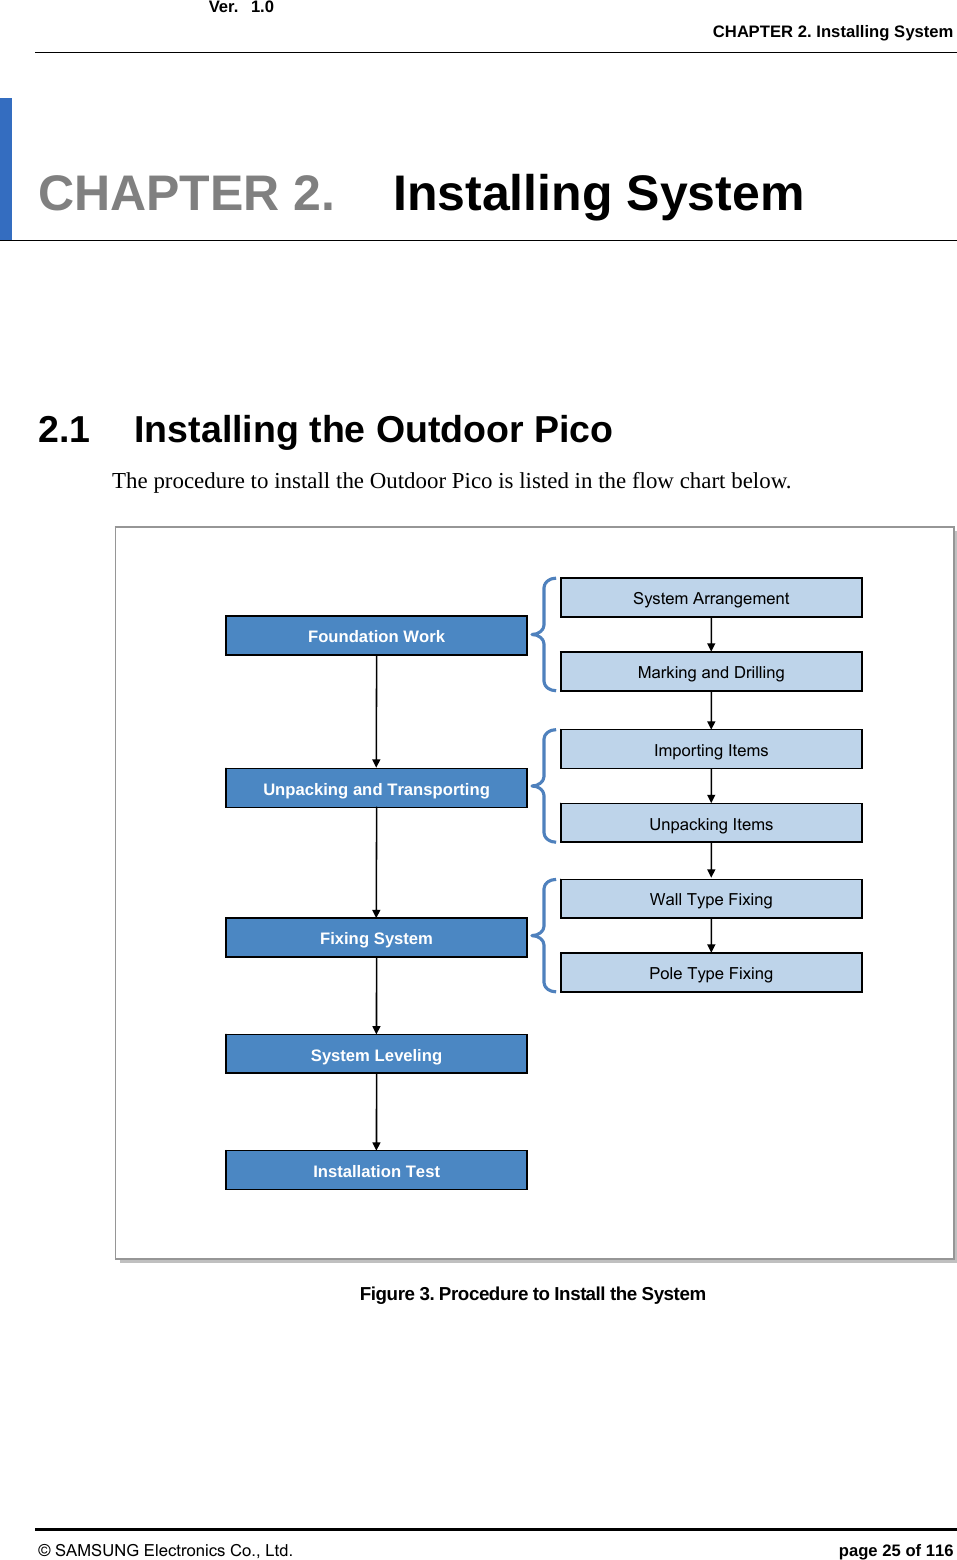  Ver.  CHAPTER 2. Installing System © SAMSUNG Electronics Co., Ltd.  page 25 of 116 1.0 CHAPTER 2.  Installing System      2.1  Installing the Outdoor Pico The procedure to install the Outdoor Pico is listed in the flow chart below.  Figure 3. Procedure to Install the System  Foundation Work Unpacking and Transporting Marking and Drilling System Arrangement Fixing System System Leveling Installation Test Unpacking Items Importing Items Pole Type Fixing Wall Type Fixing 